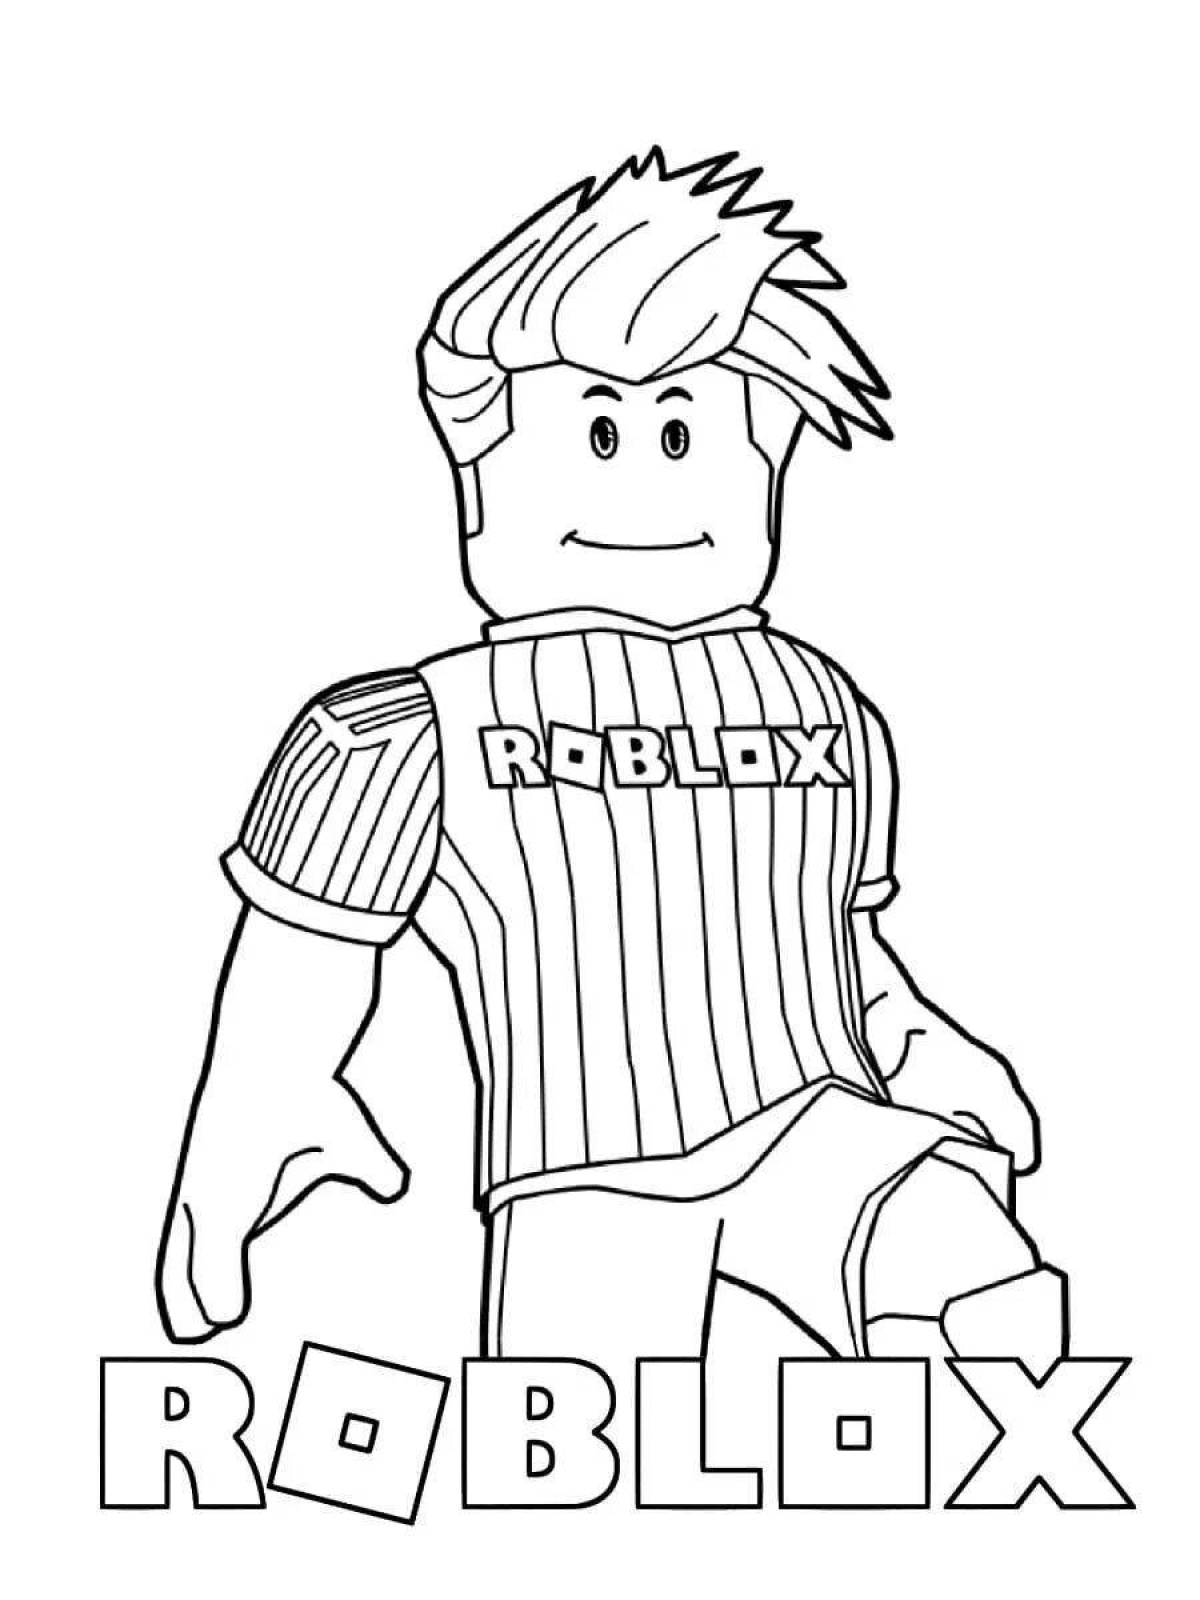 Dazzling roblox coloring book for girls